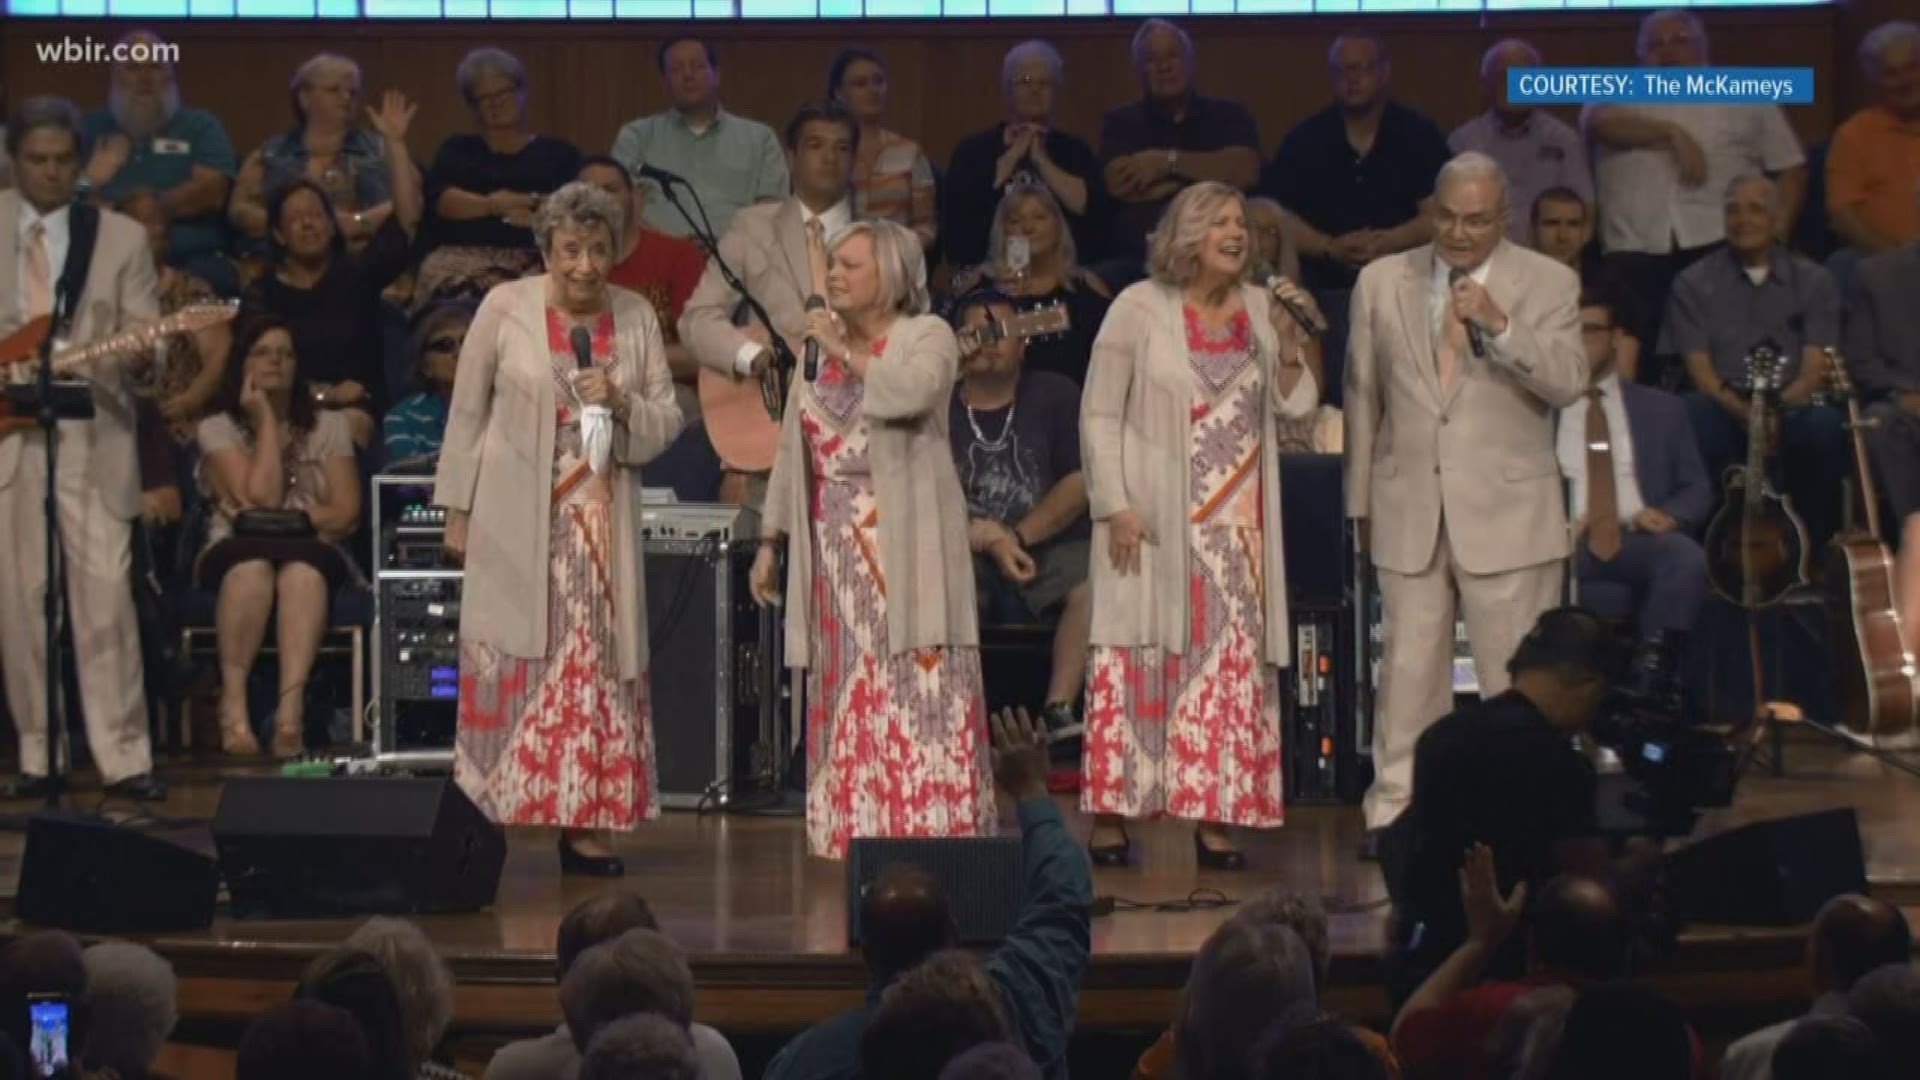 Southern Gospel greats, The McKameys, prepare for final concert as a